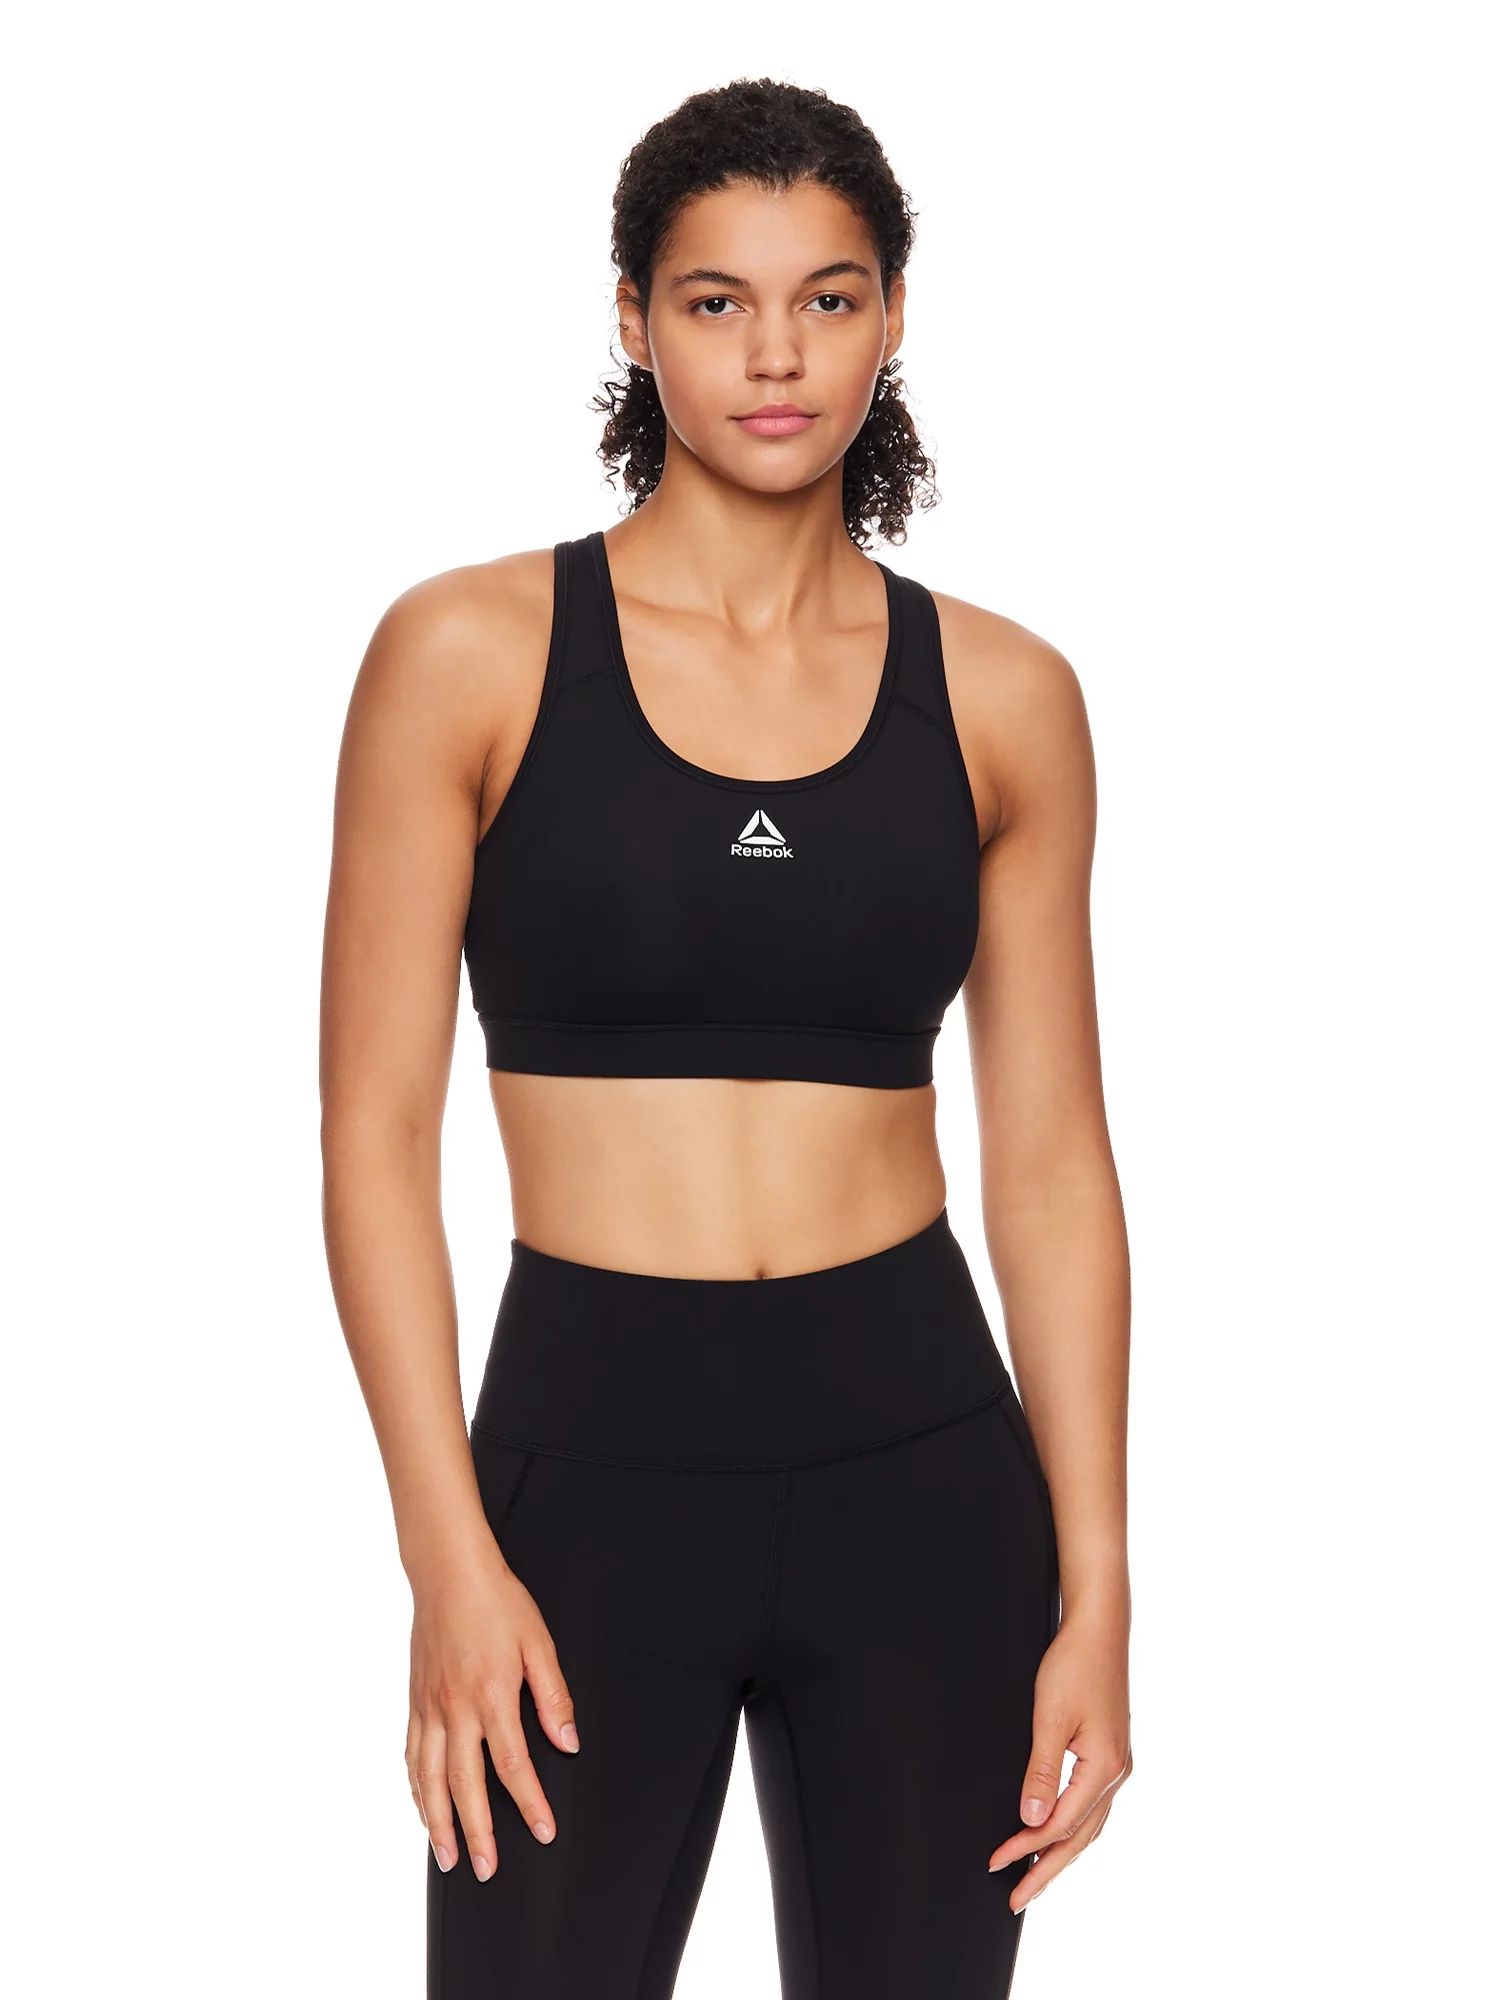 Reebok Women's Stronger Sports Bra with Mesh Panel and Removable Cups, Sizes XS-XXXL | Walmart (US)